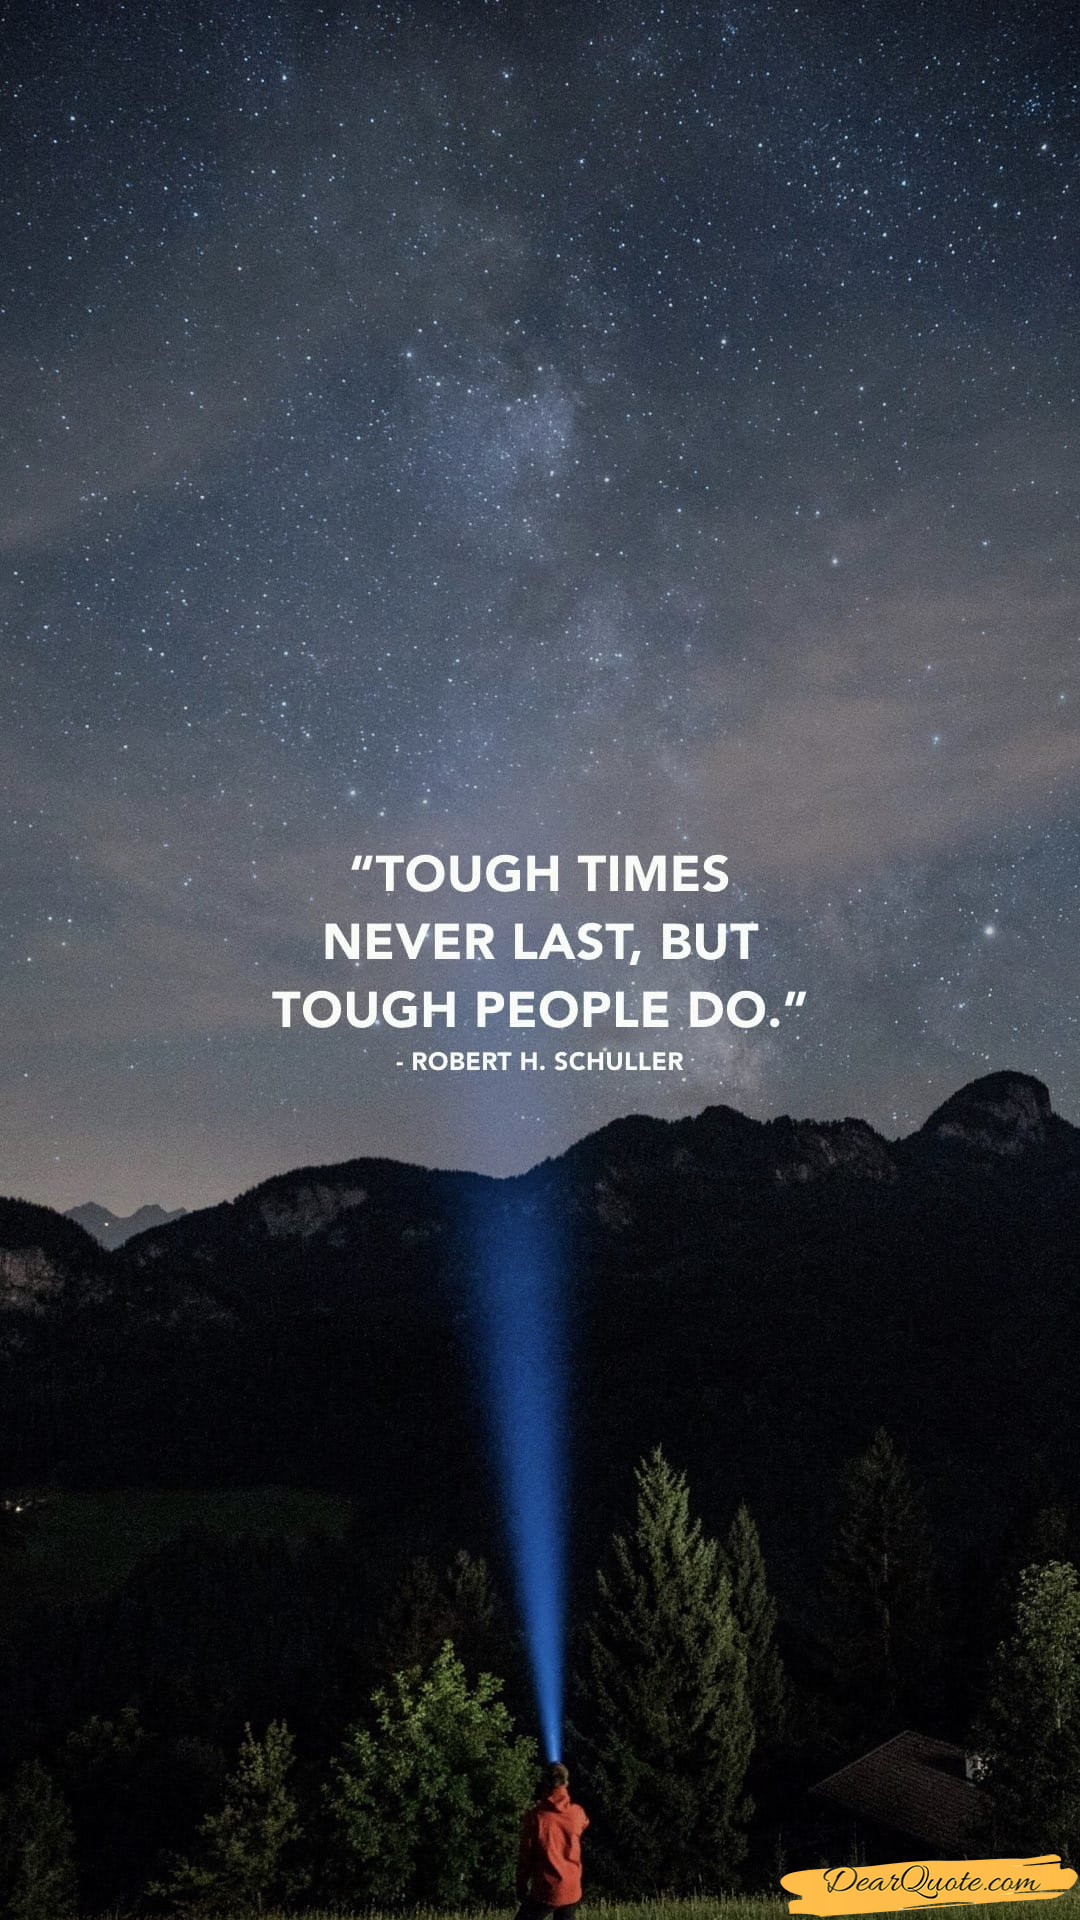 1080x1920 [image] Phone Wallpaper: "tough Times Never Last, but Tough People Do." -  Robert Schuller - DearQuote